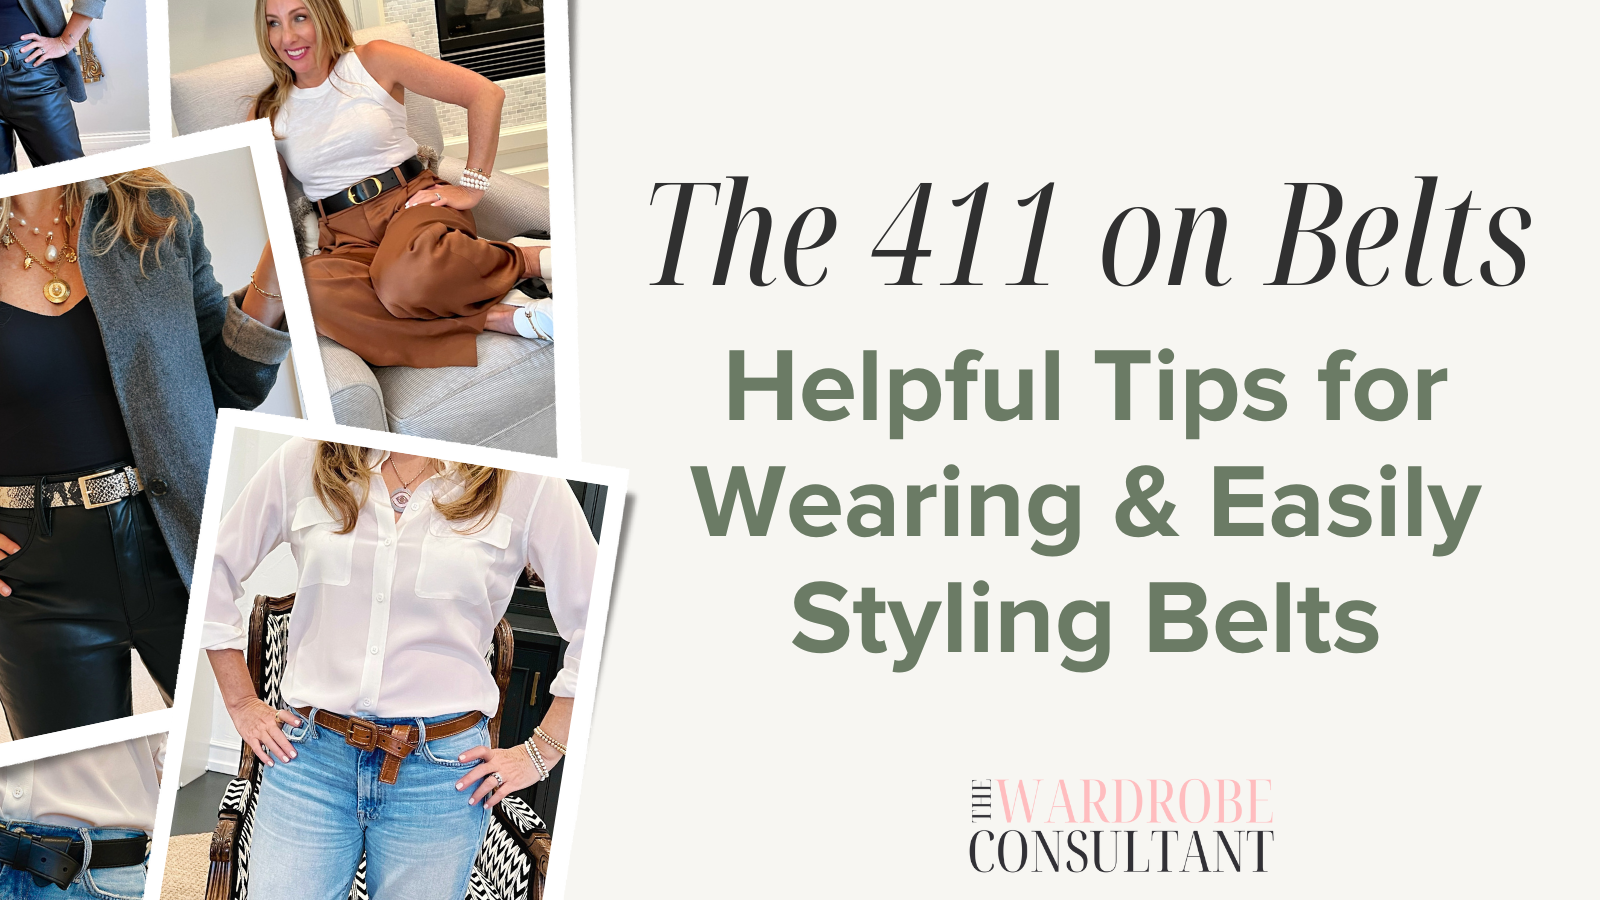 Sweater Tucking Tips & Tricks: How to Belt over a Dress